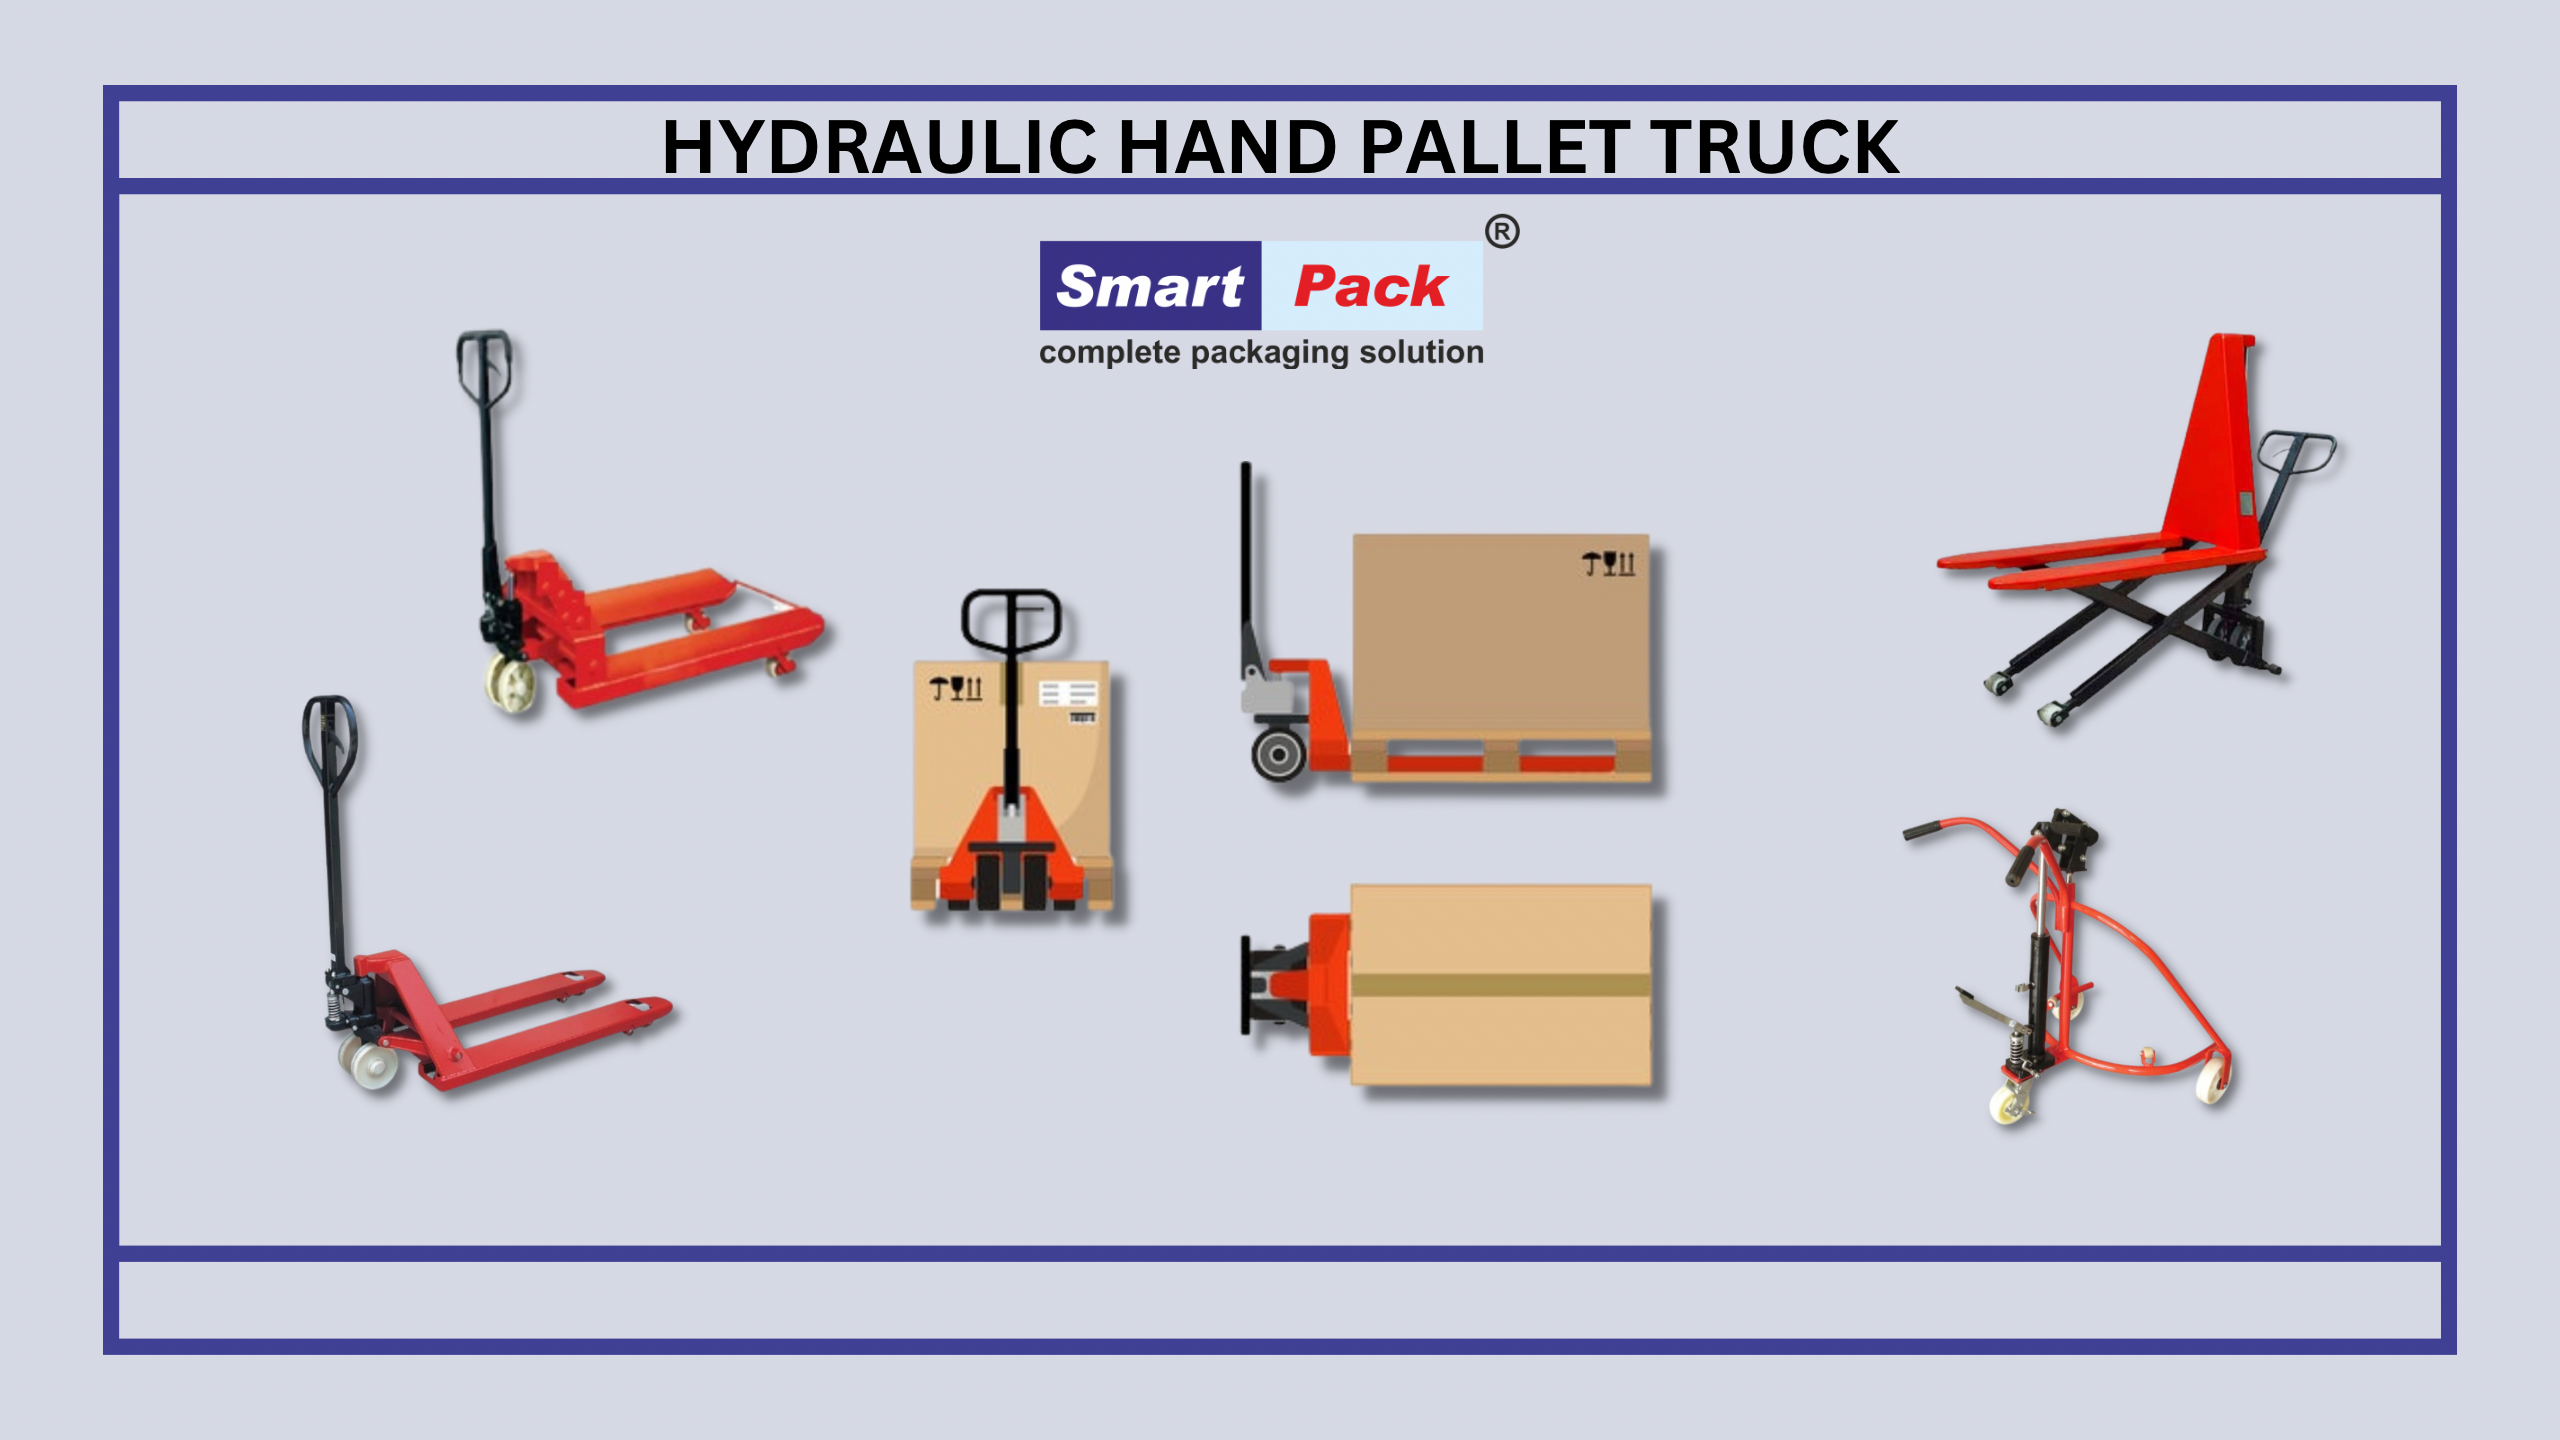 The Benefits of Using a Hand Pallet Truck in Your Warehouse